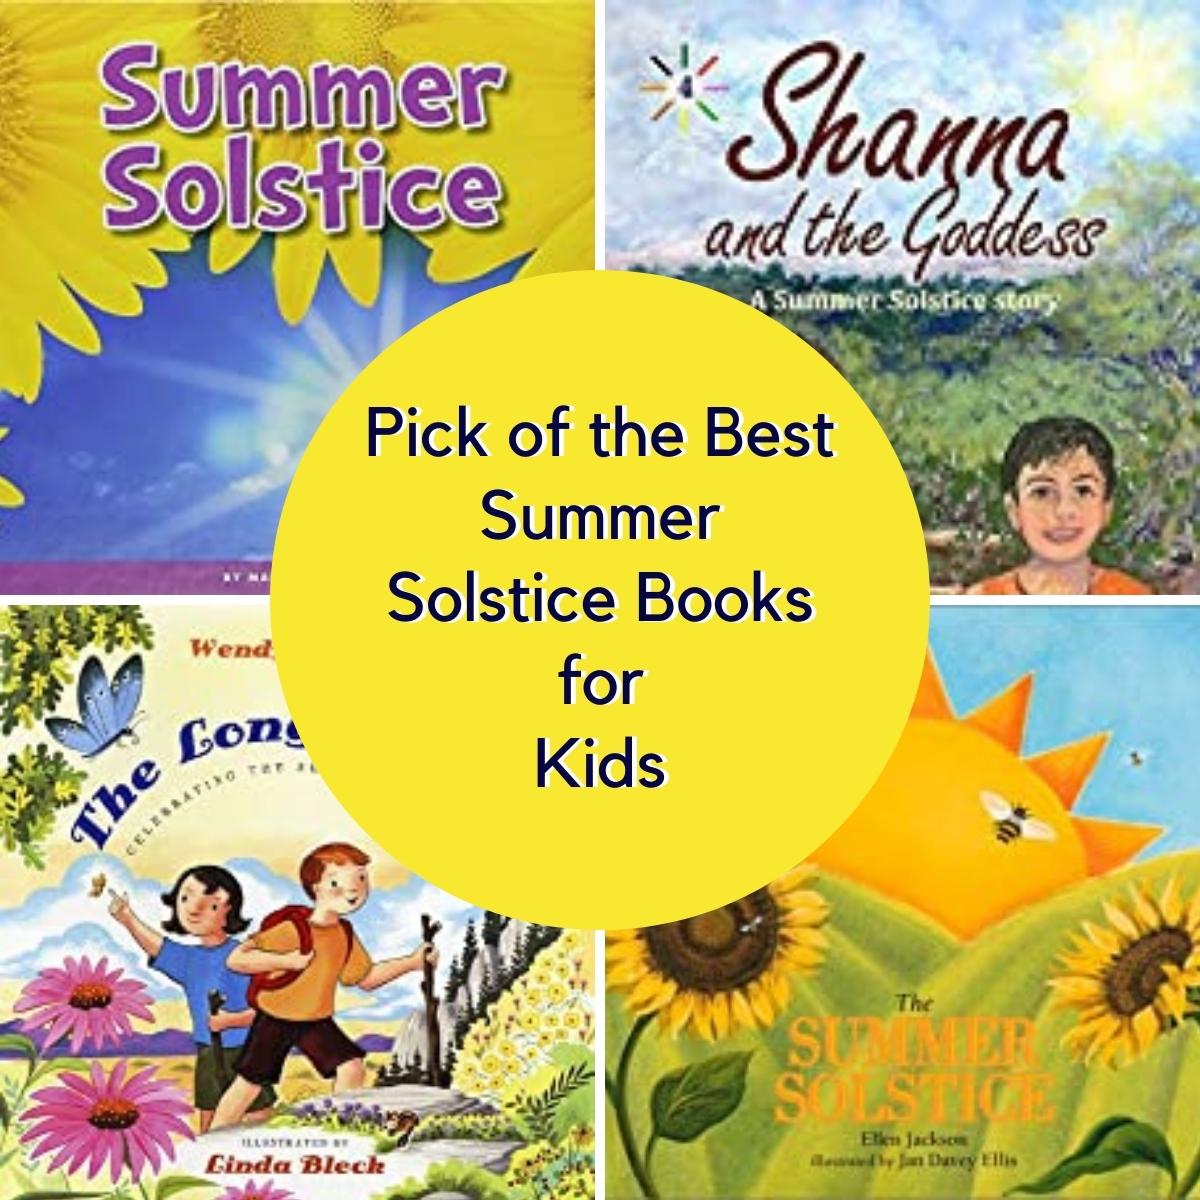 Collage showing the covers of 4 of the best summer solstice books for kids to read. The text in the centre reads Pick of the Best Summer Solstice Books for Kids